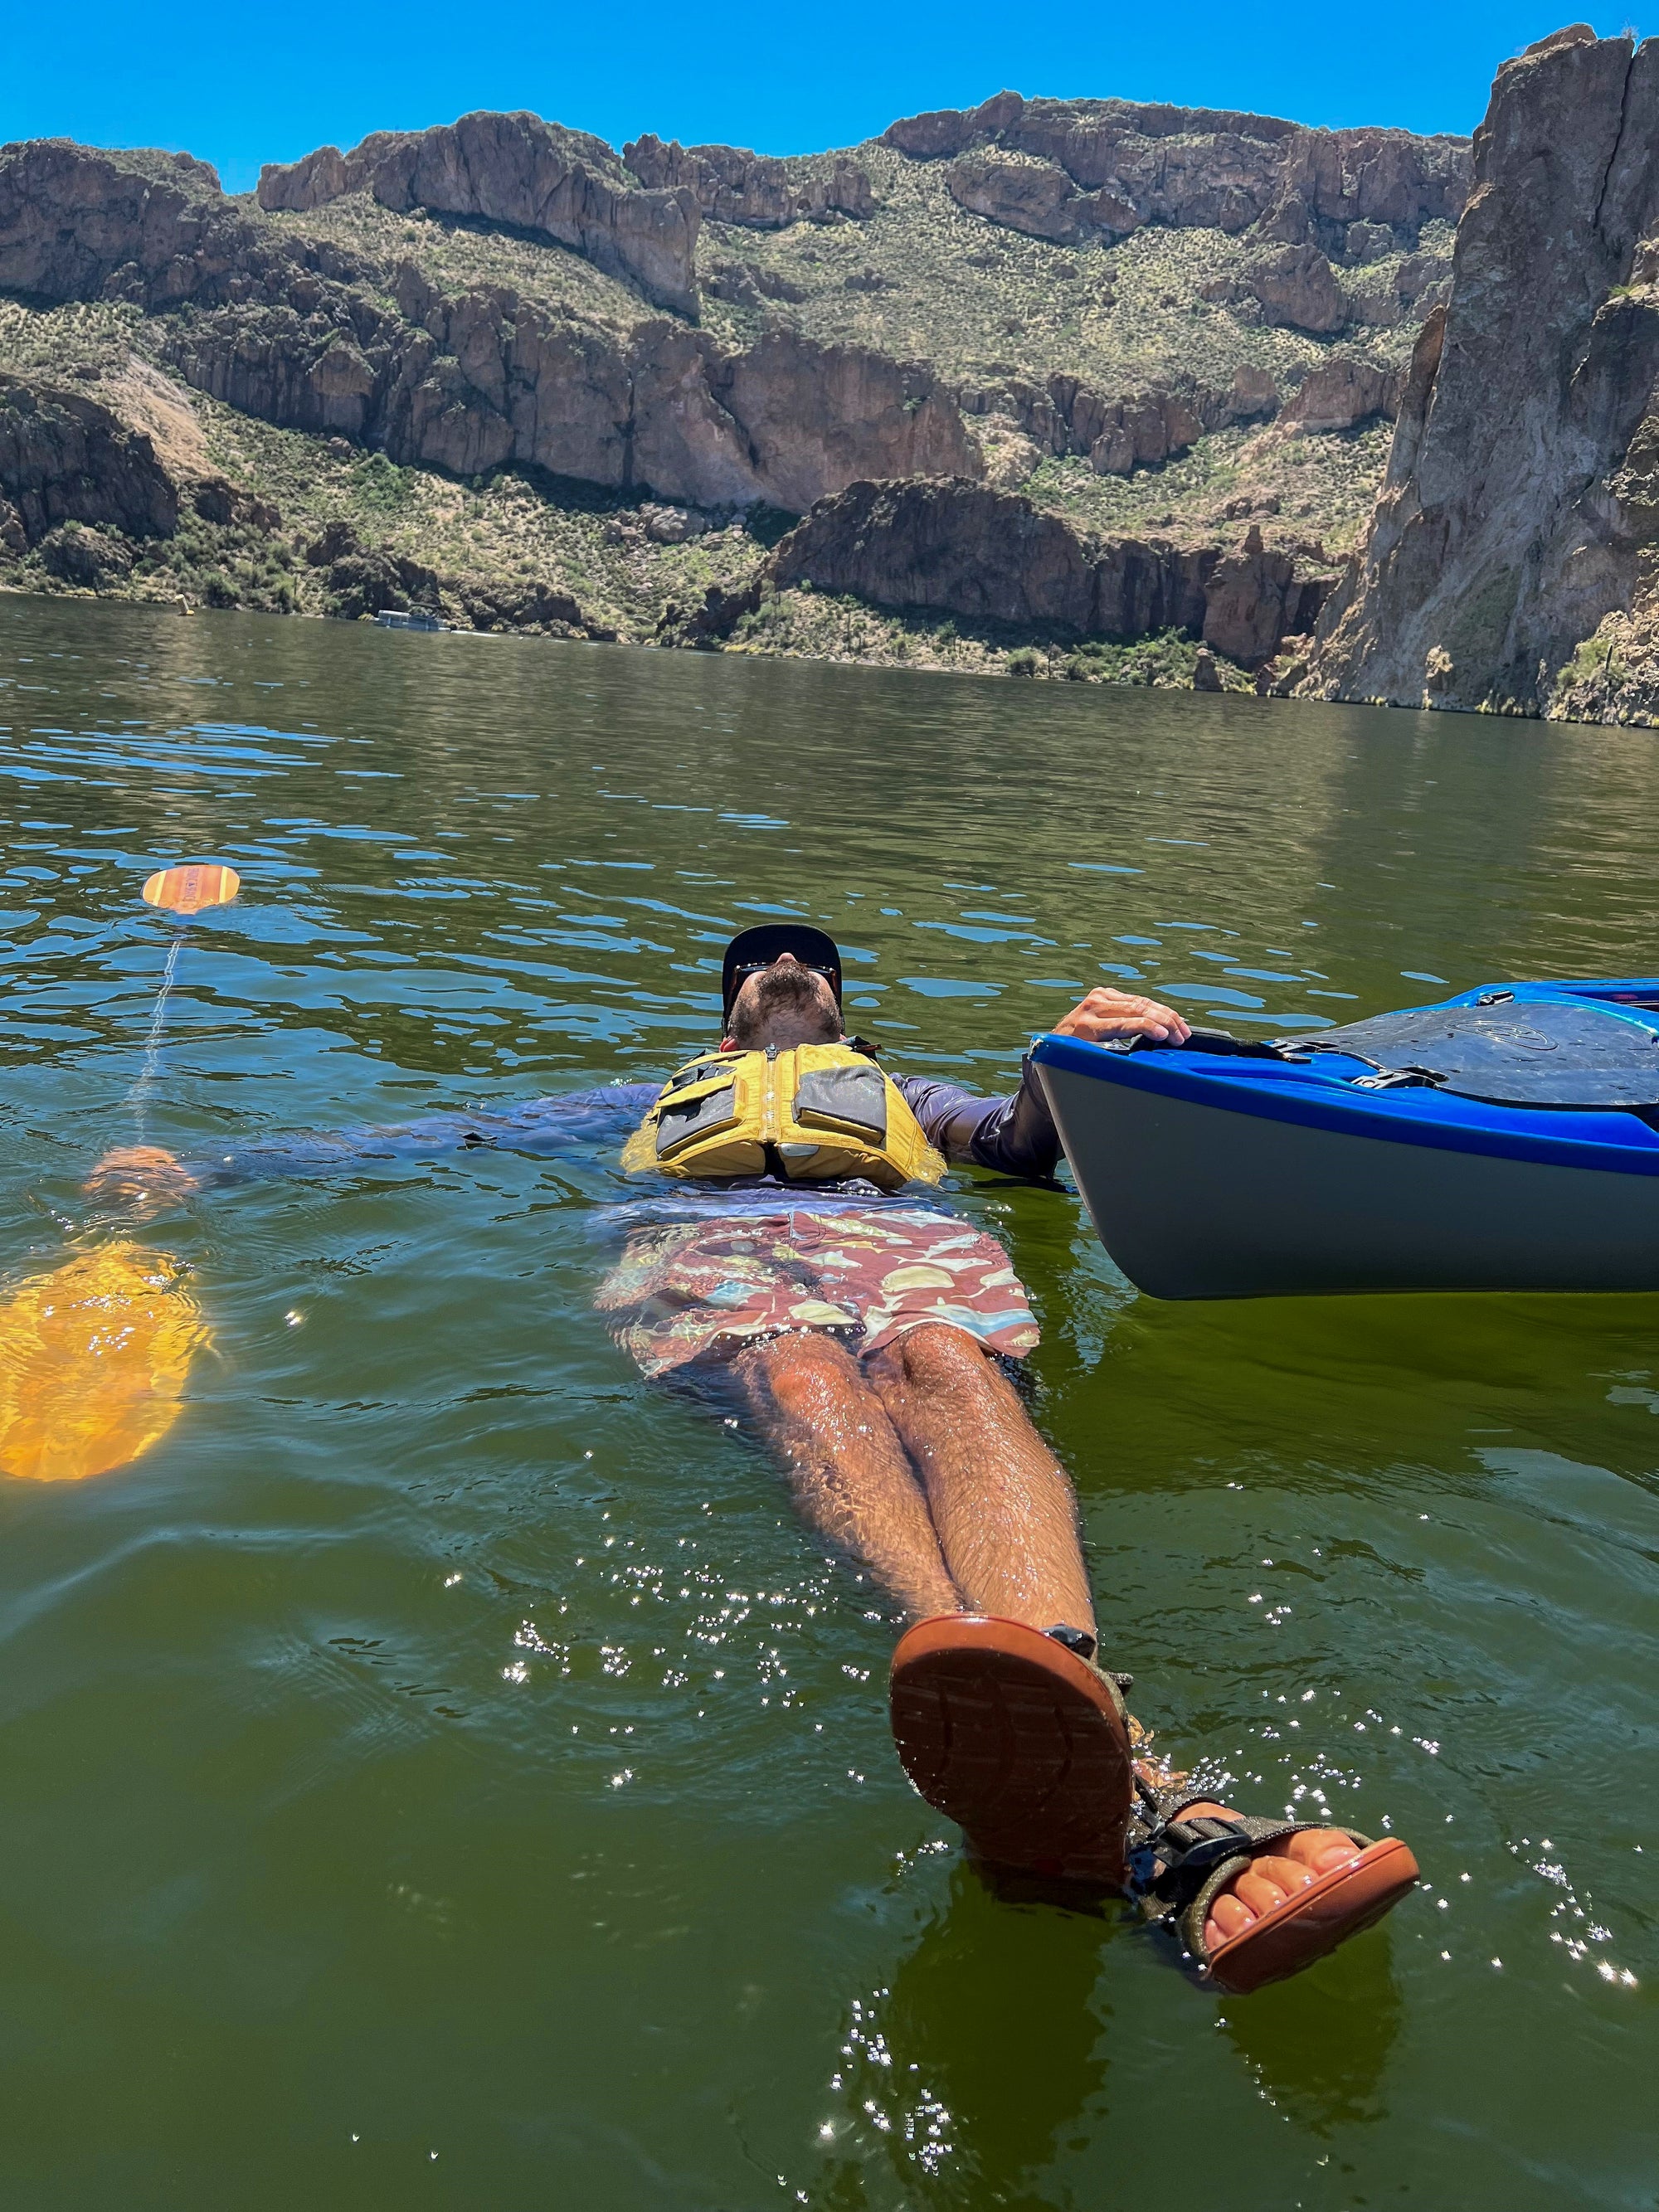 Personal Challenge: 3 Rescue Techniques Every Kayaker Should Know